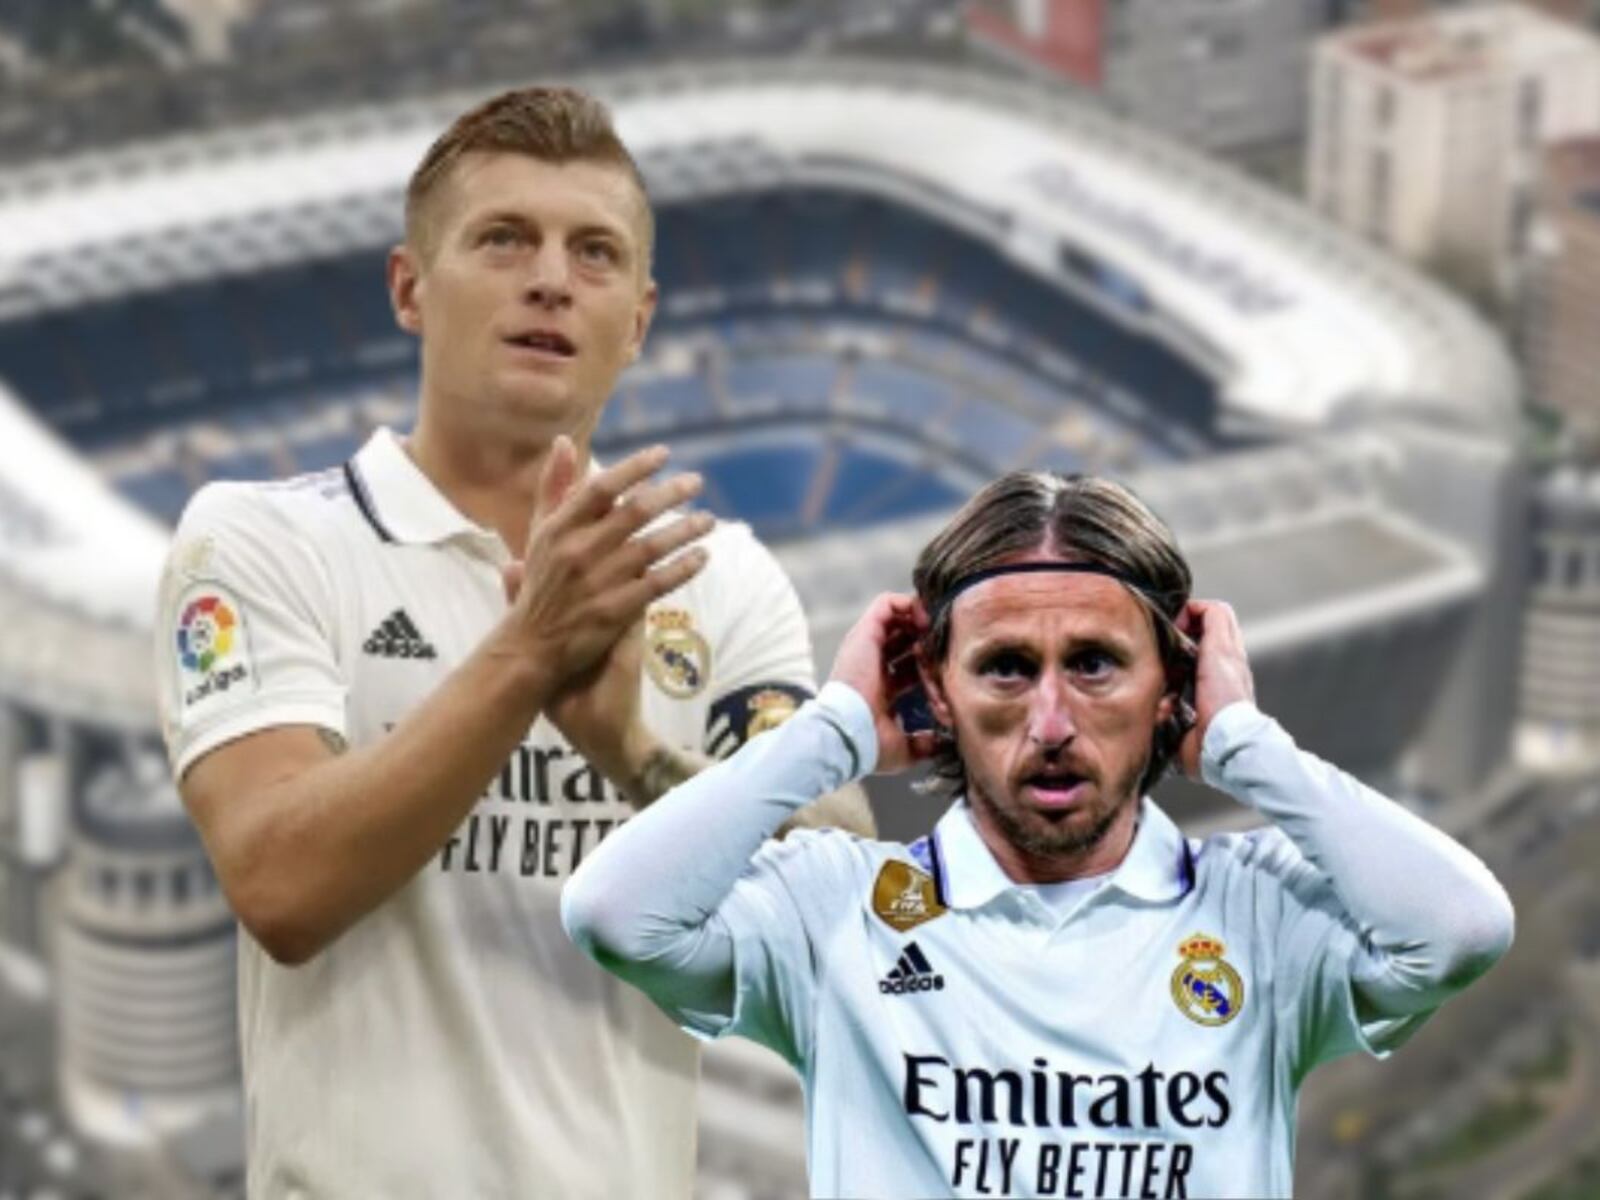 From one crack to another, the request made to Toni Kroos but not to Modric